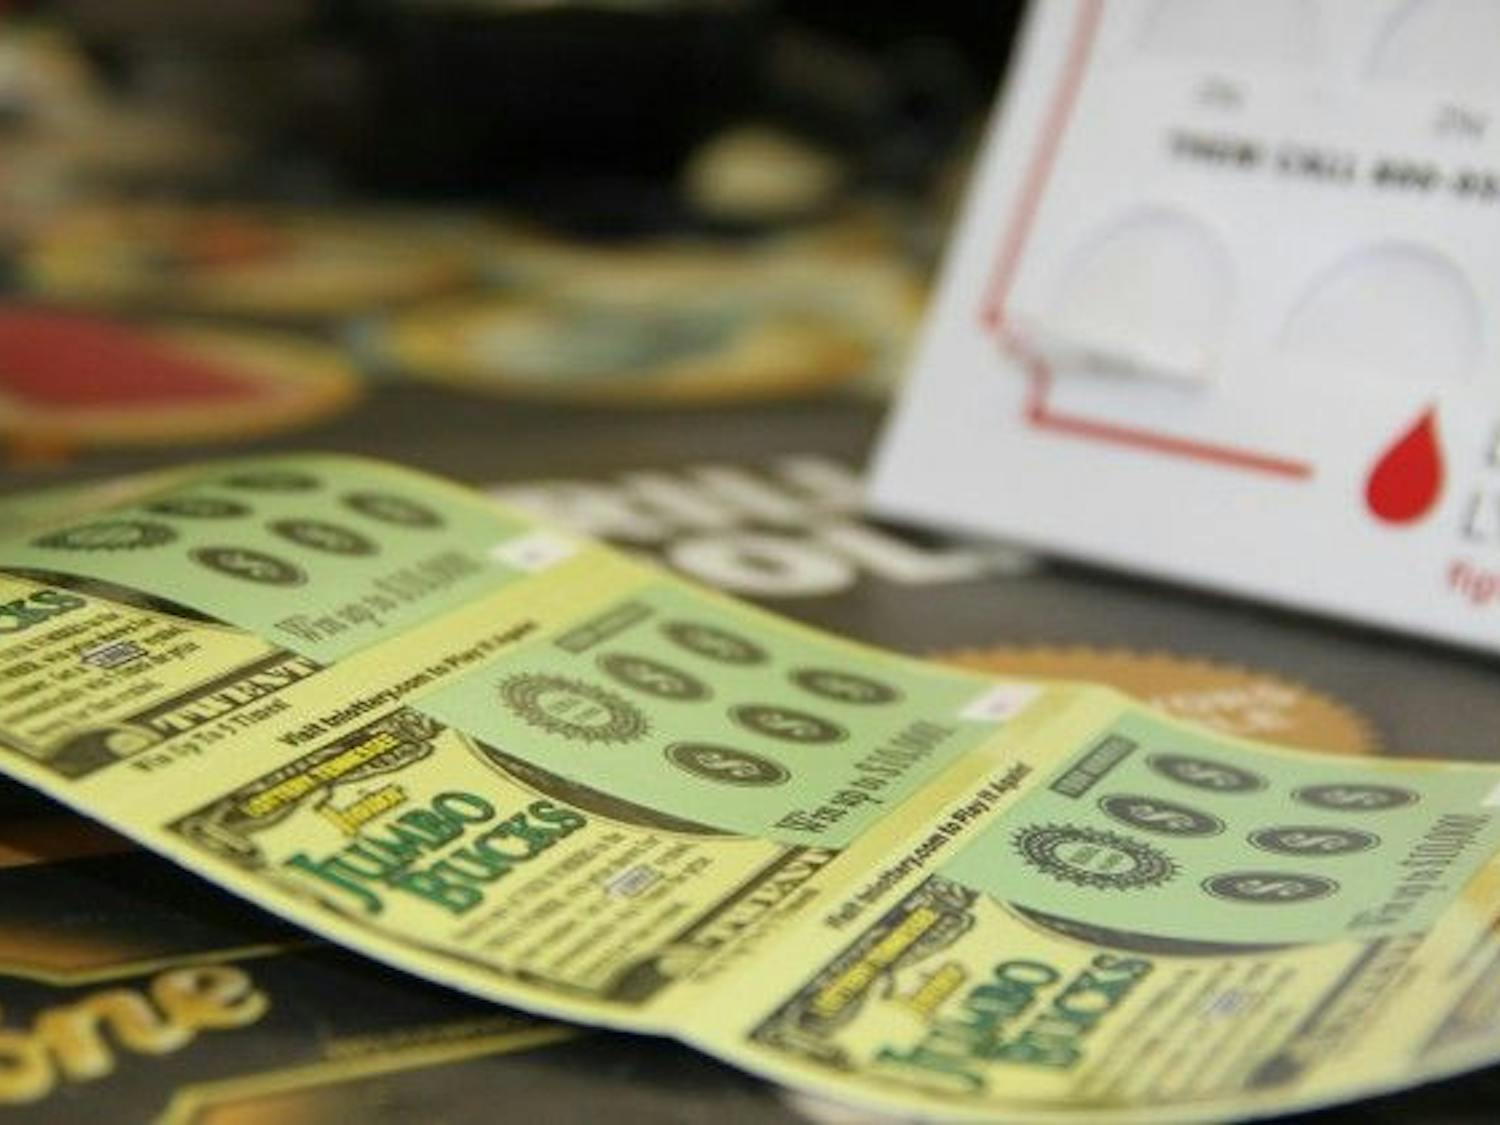 Gamblers push luck in lottery